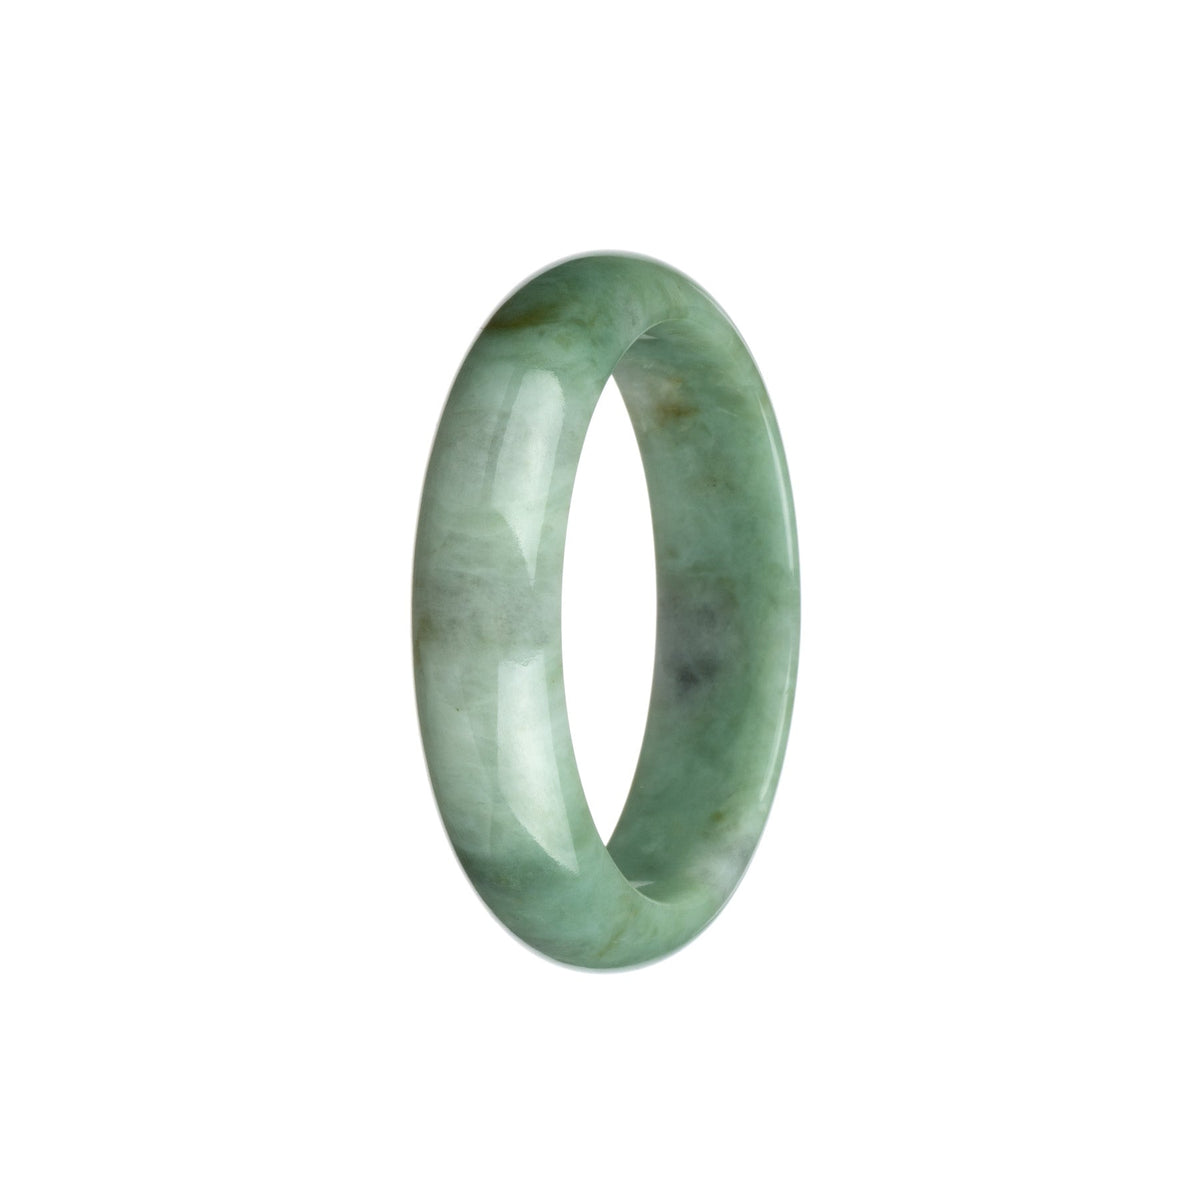 A half-moon shaped traditional jade bangle with a certified untreated green and white pattern, measuring 54mm. From MAYS GEMS.